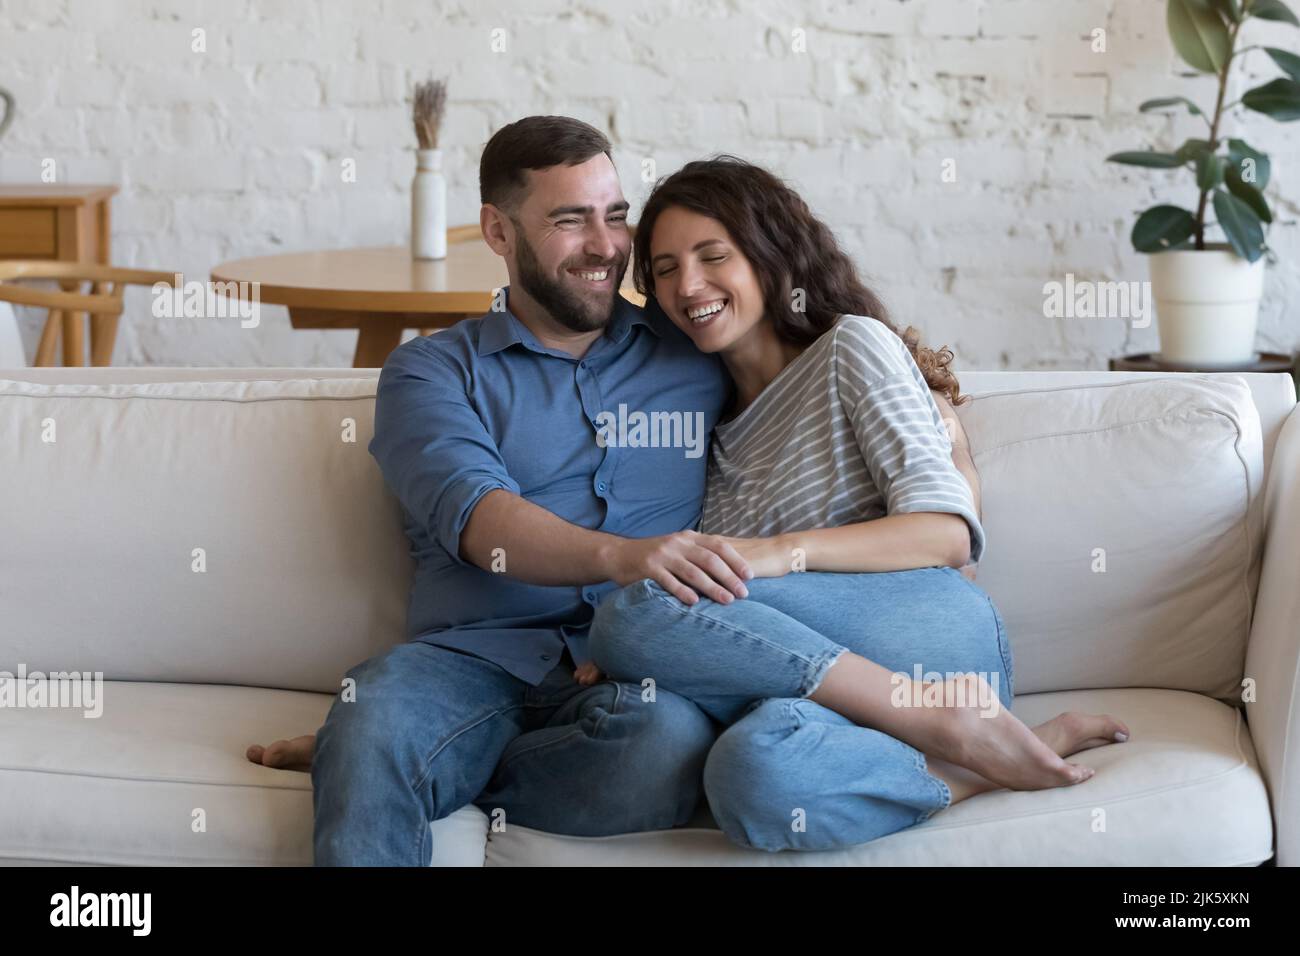 Cheerful dating couple in love enjoying being at home together Stock Photo